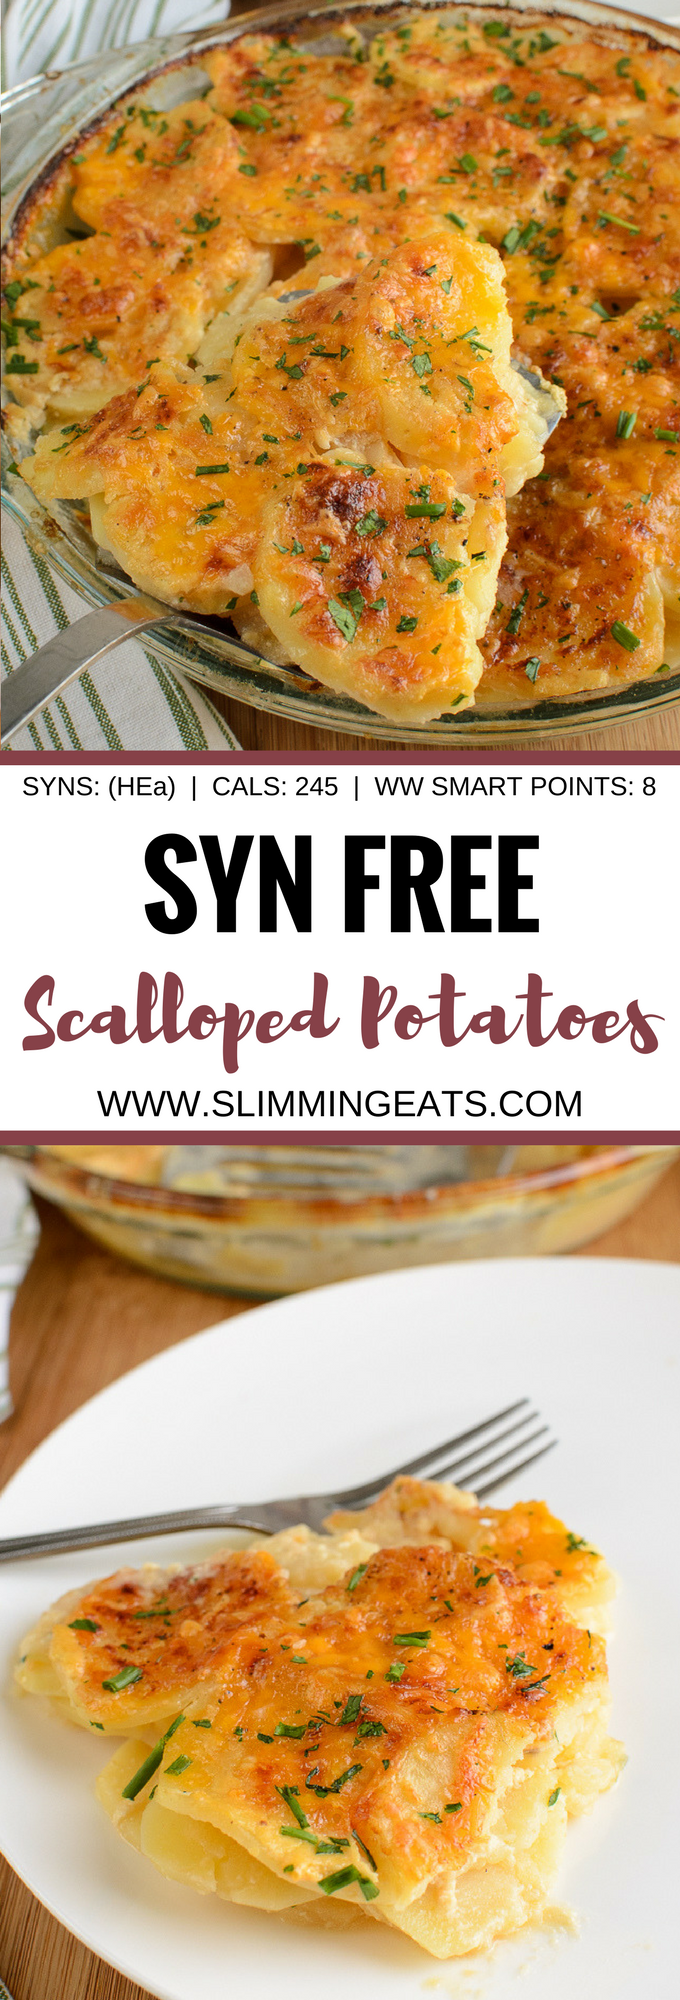 Slimming Eats Syn Free Scalloped Potatoes - gluten free, vegetarian, Slimming World and Weight Watchers friendly